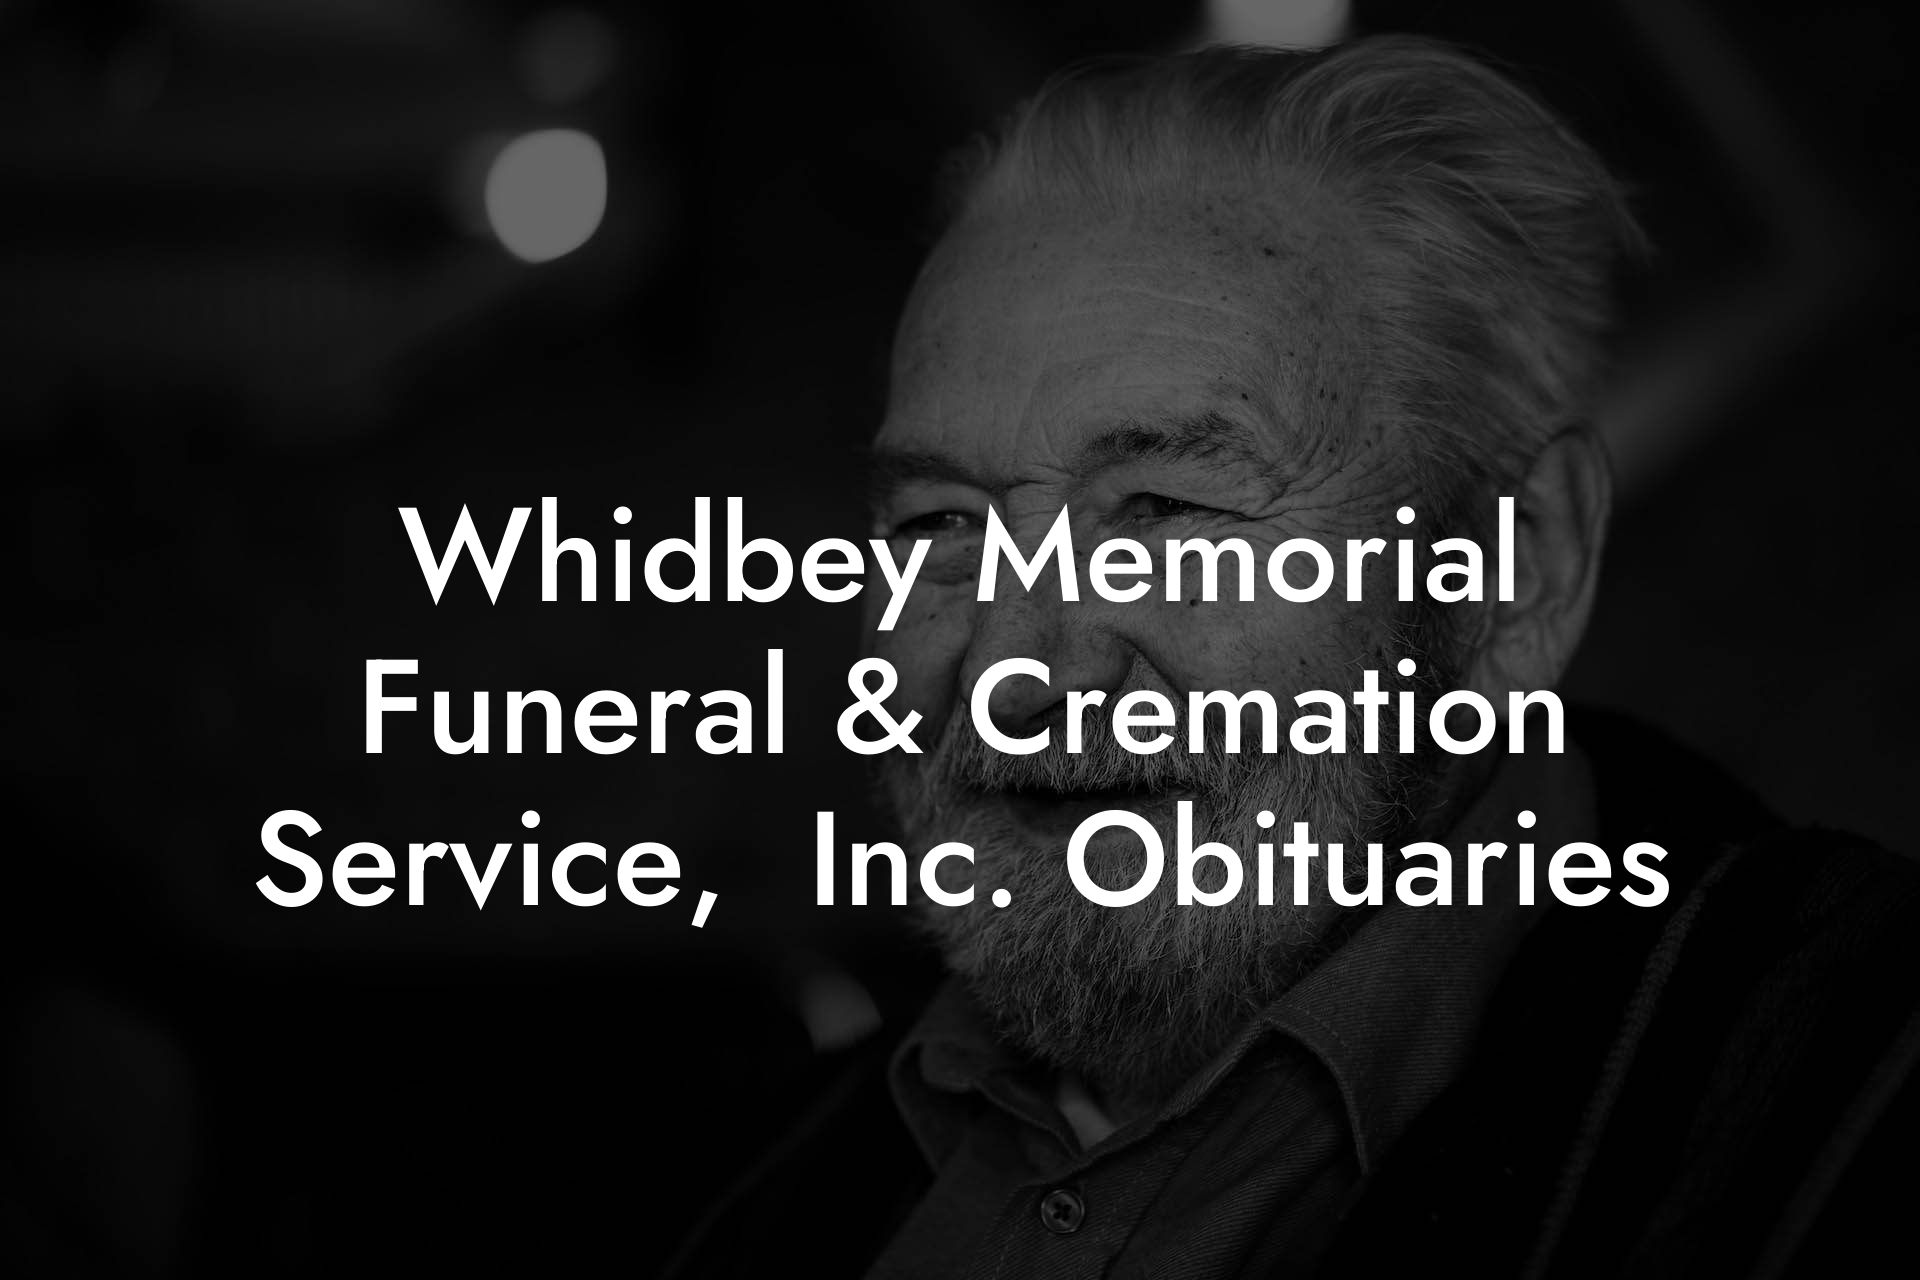 Whidbey Memorial Funeral & Cremation Service,  Inc. Obituaries